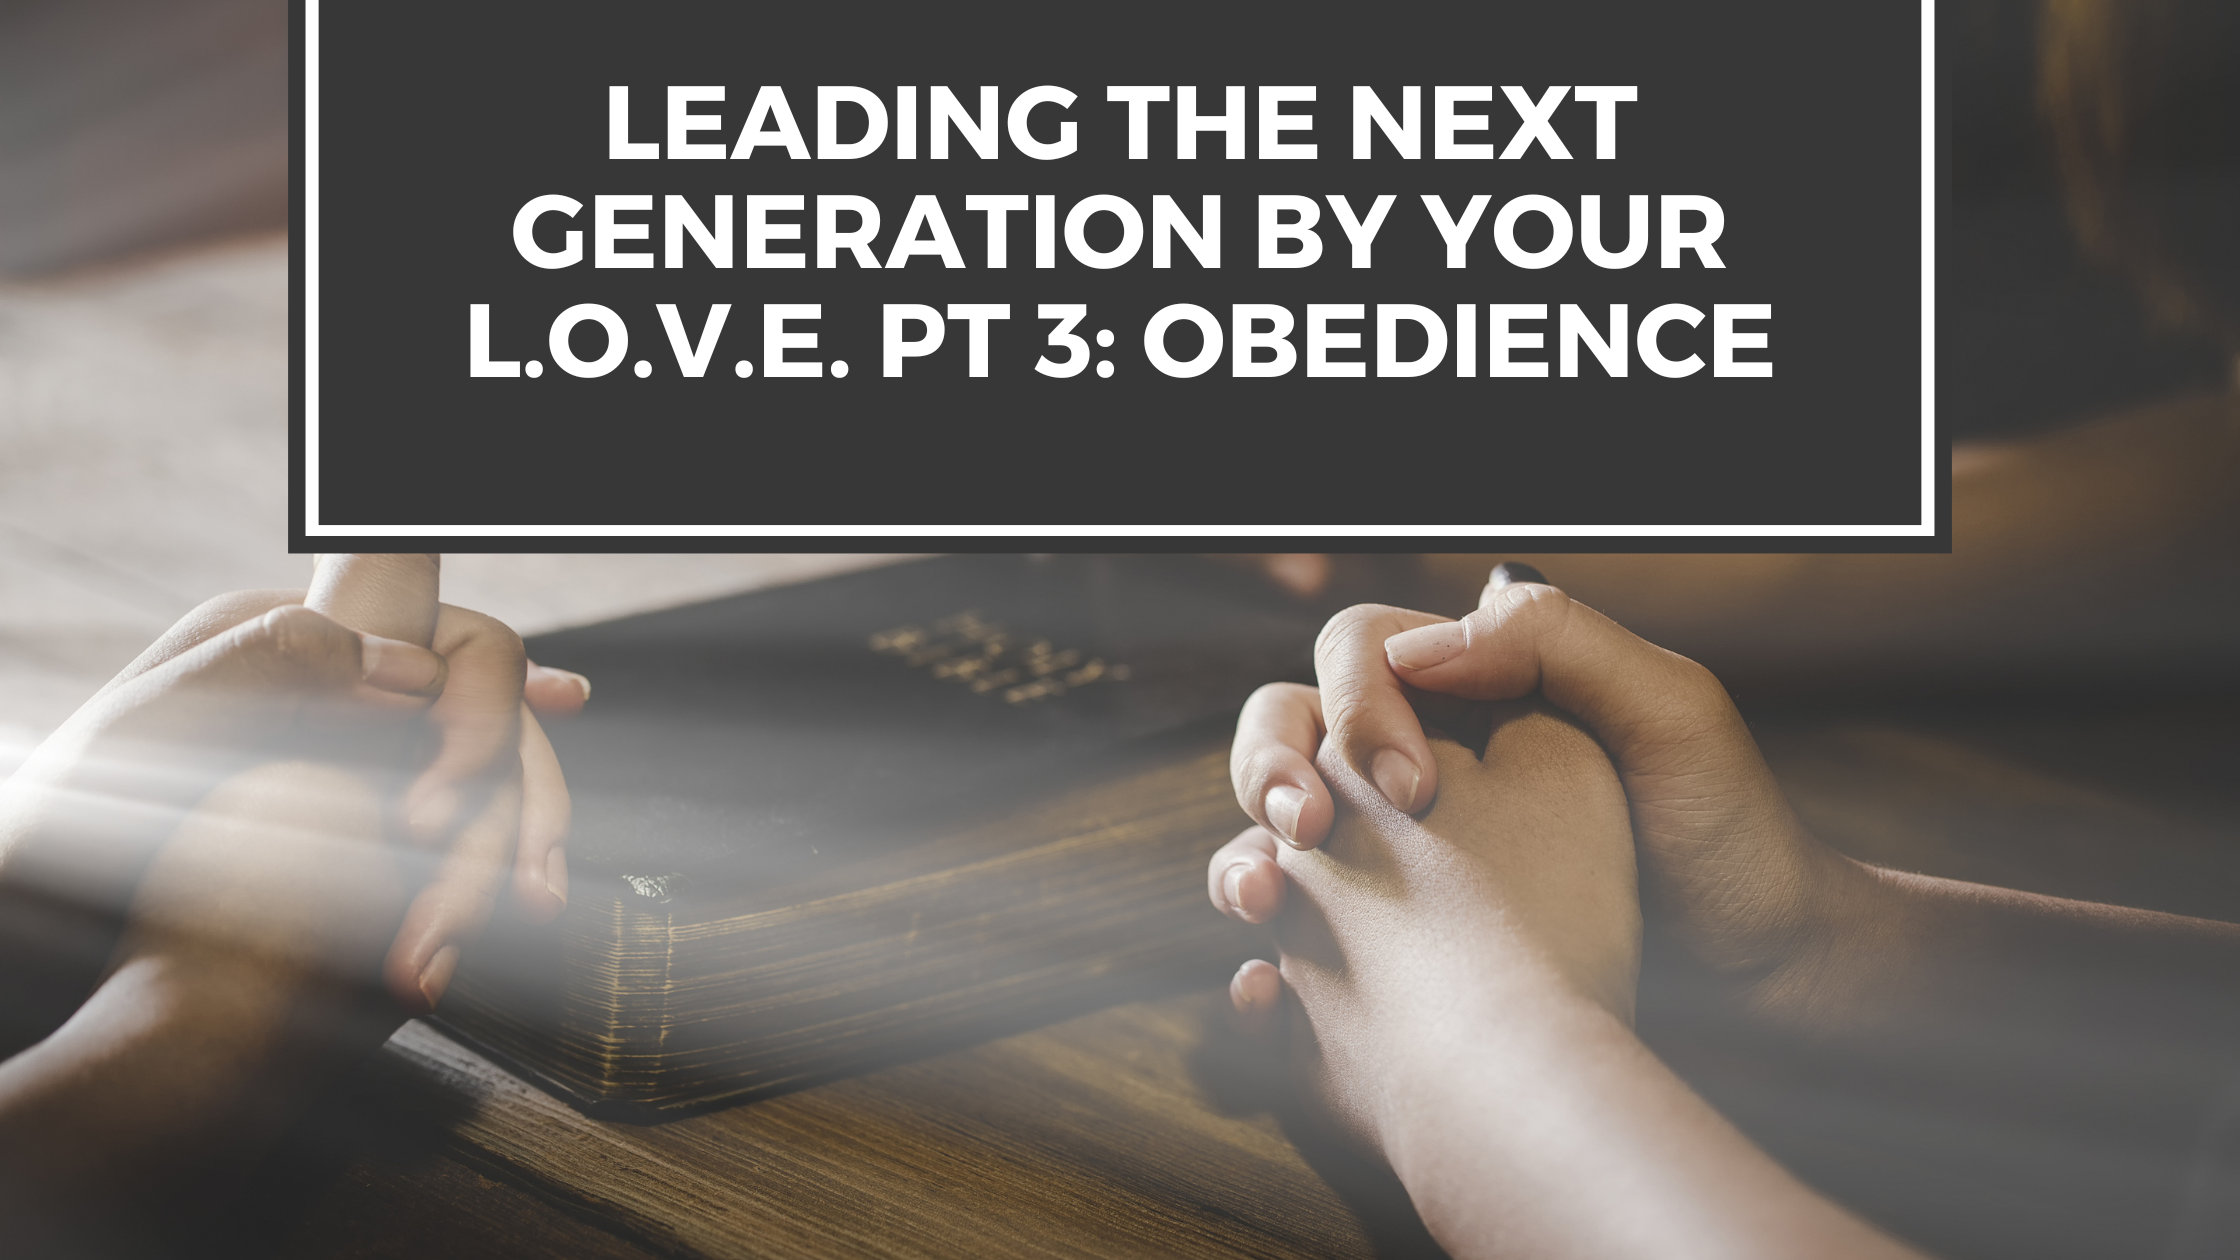 Leading the Next Generation by Your L.O.V.E. Part 3: Obedience